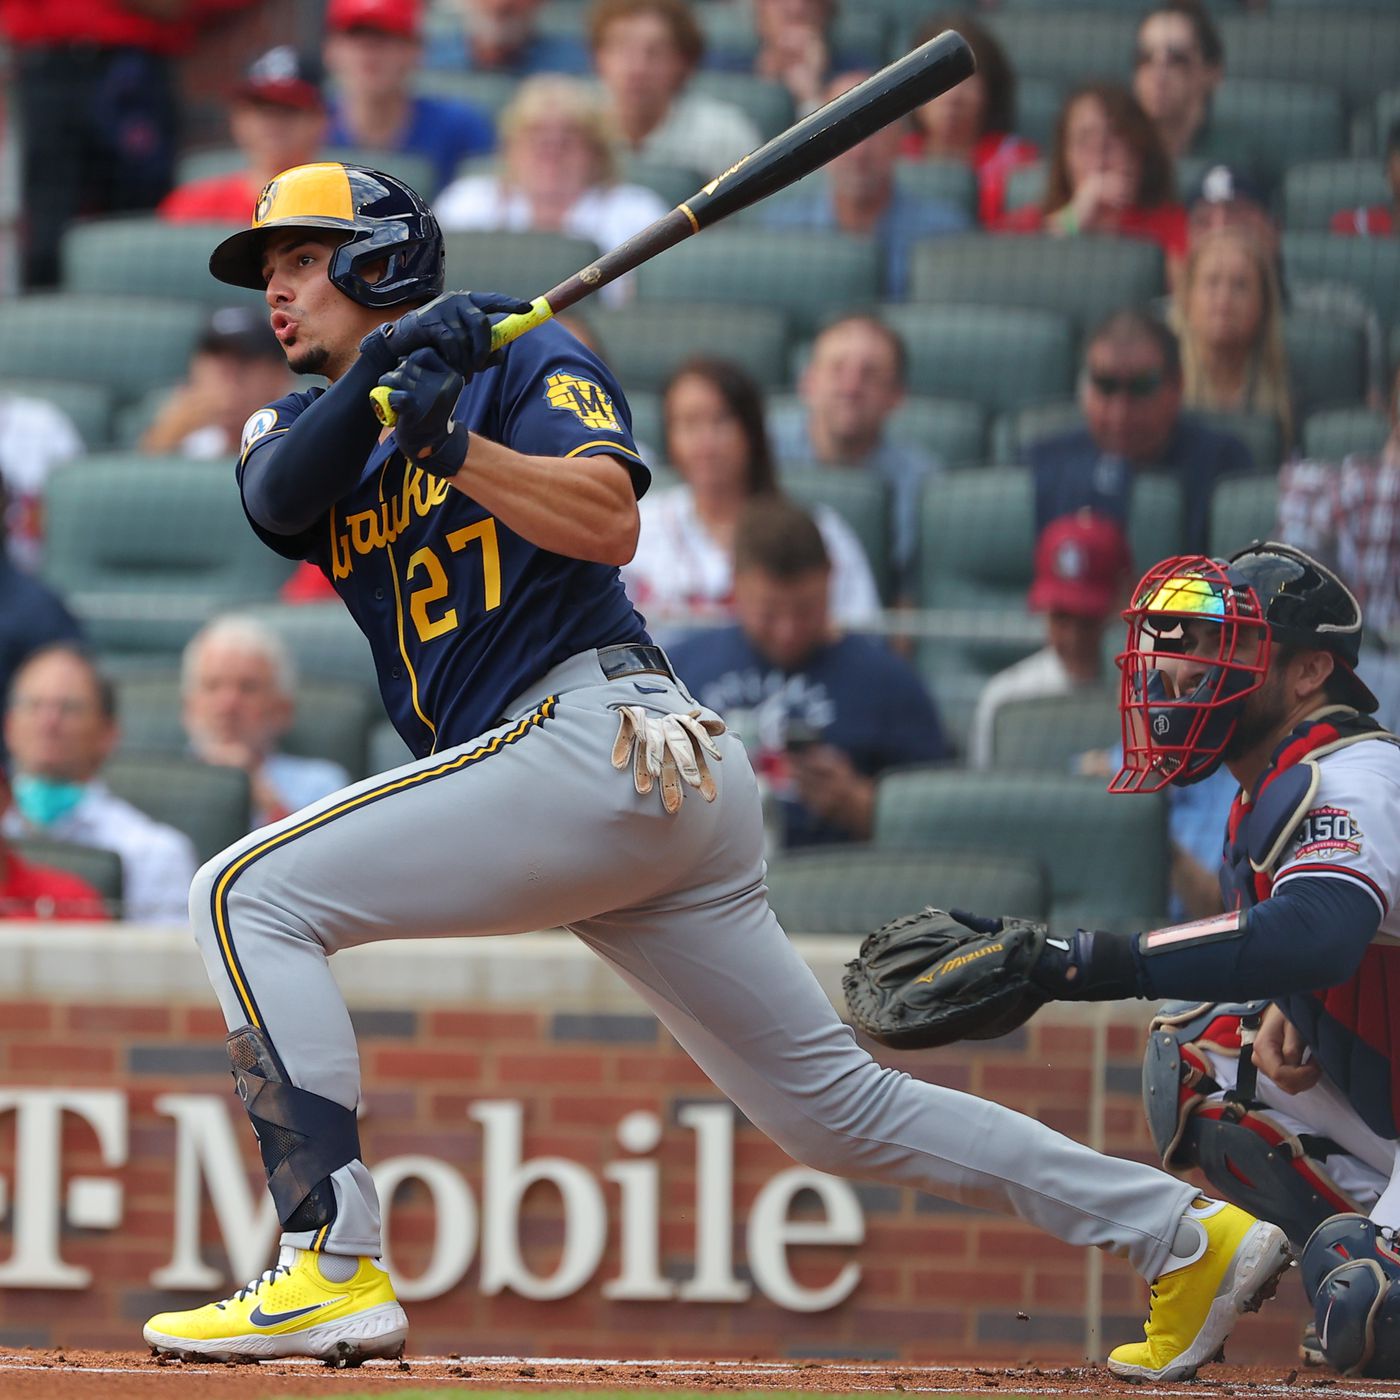 Willy Adames hit a home run and drove in three against the Washington Nationals